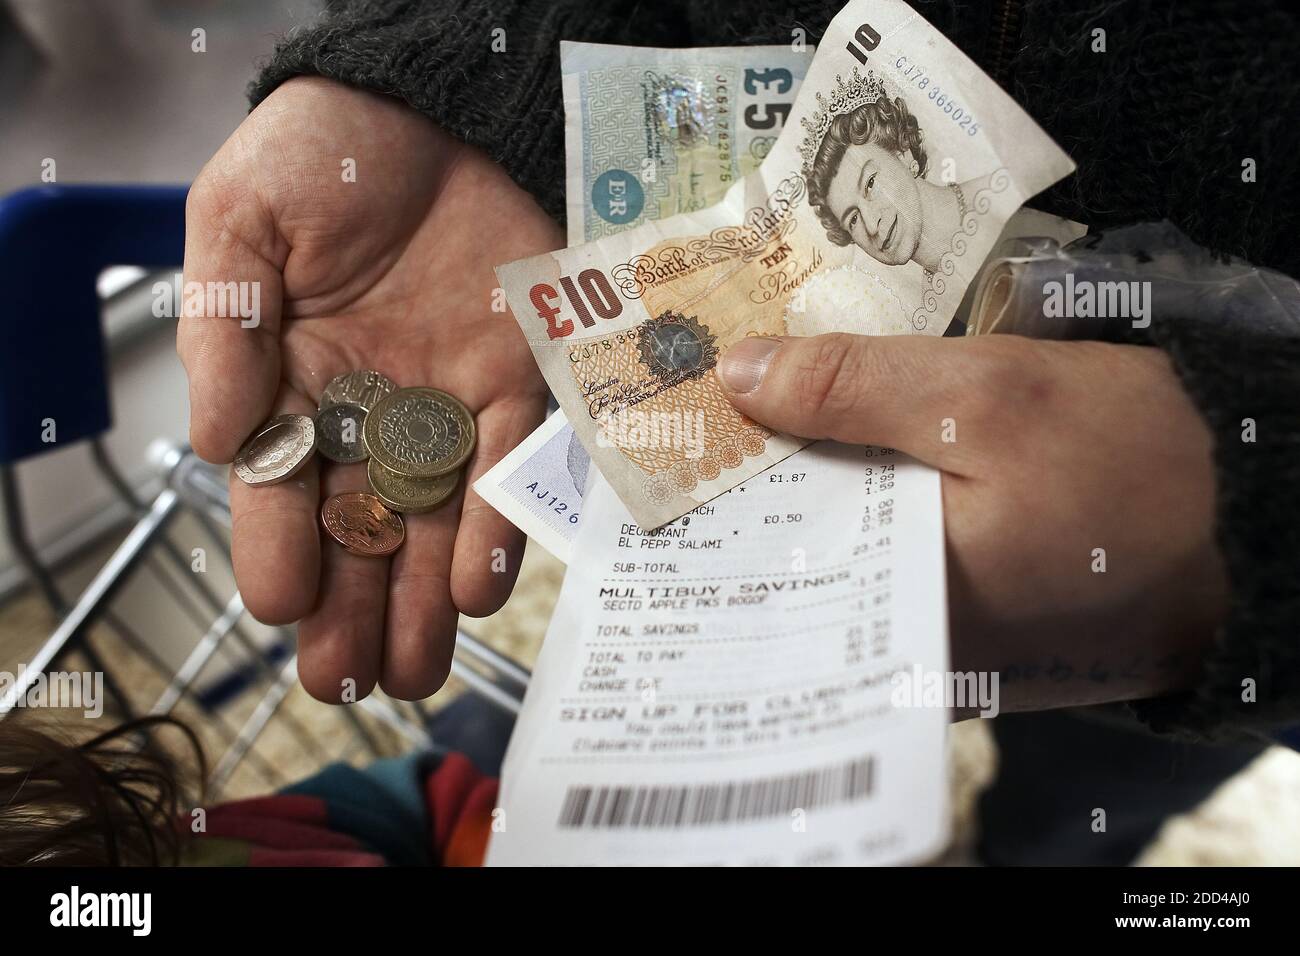 GREAT BRITAIN / England /Sterling pound notes and coins in Human Hand.man counting coins and bank notes for saving. money saving Stock Photo